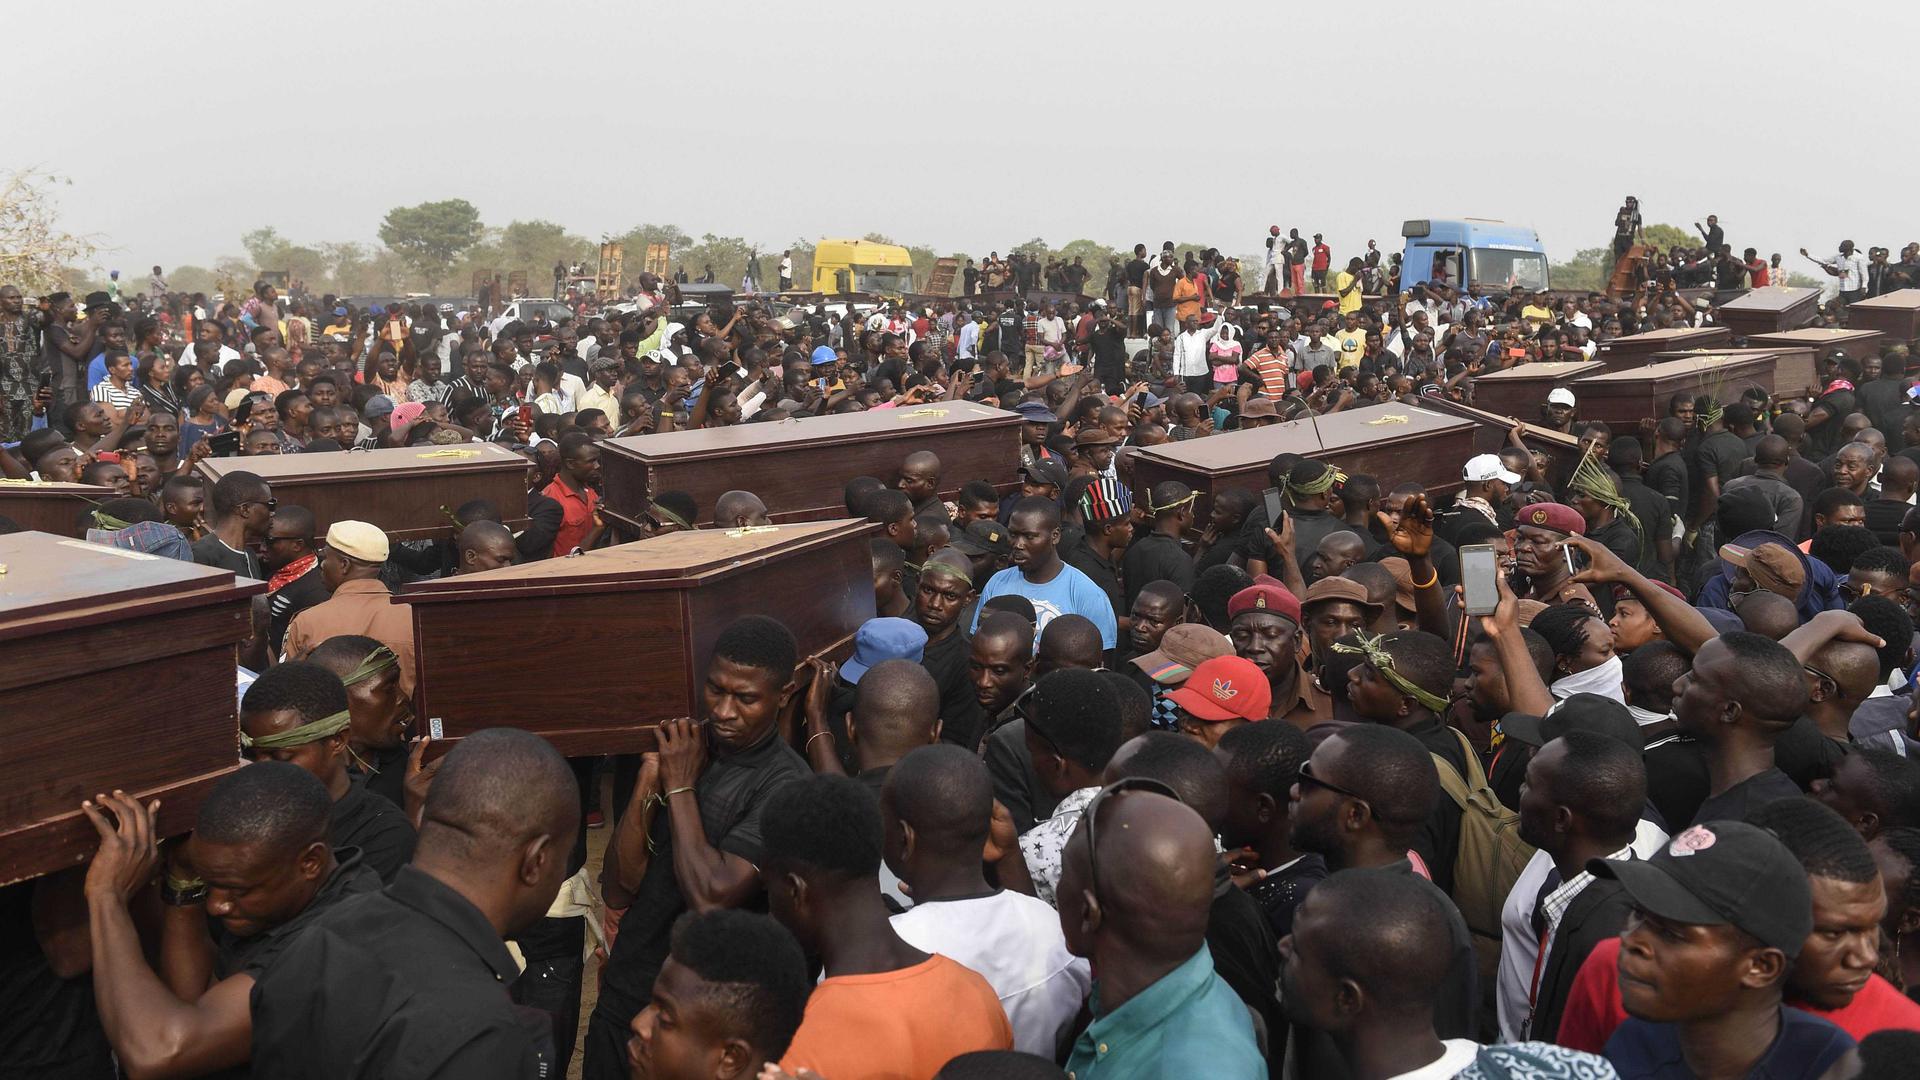 Pallbearers carry coffins during the funeral service for people killed during clashes between cattle herders and farmers in Ibrahim Babangida Square in the Benue state capital, Makurdi, January 11, 2018. Violence between the mainly Muslim Fulani herdsmen 